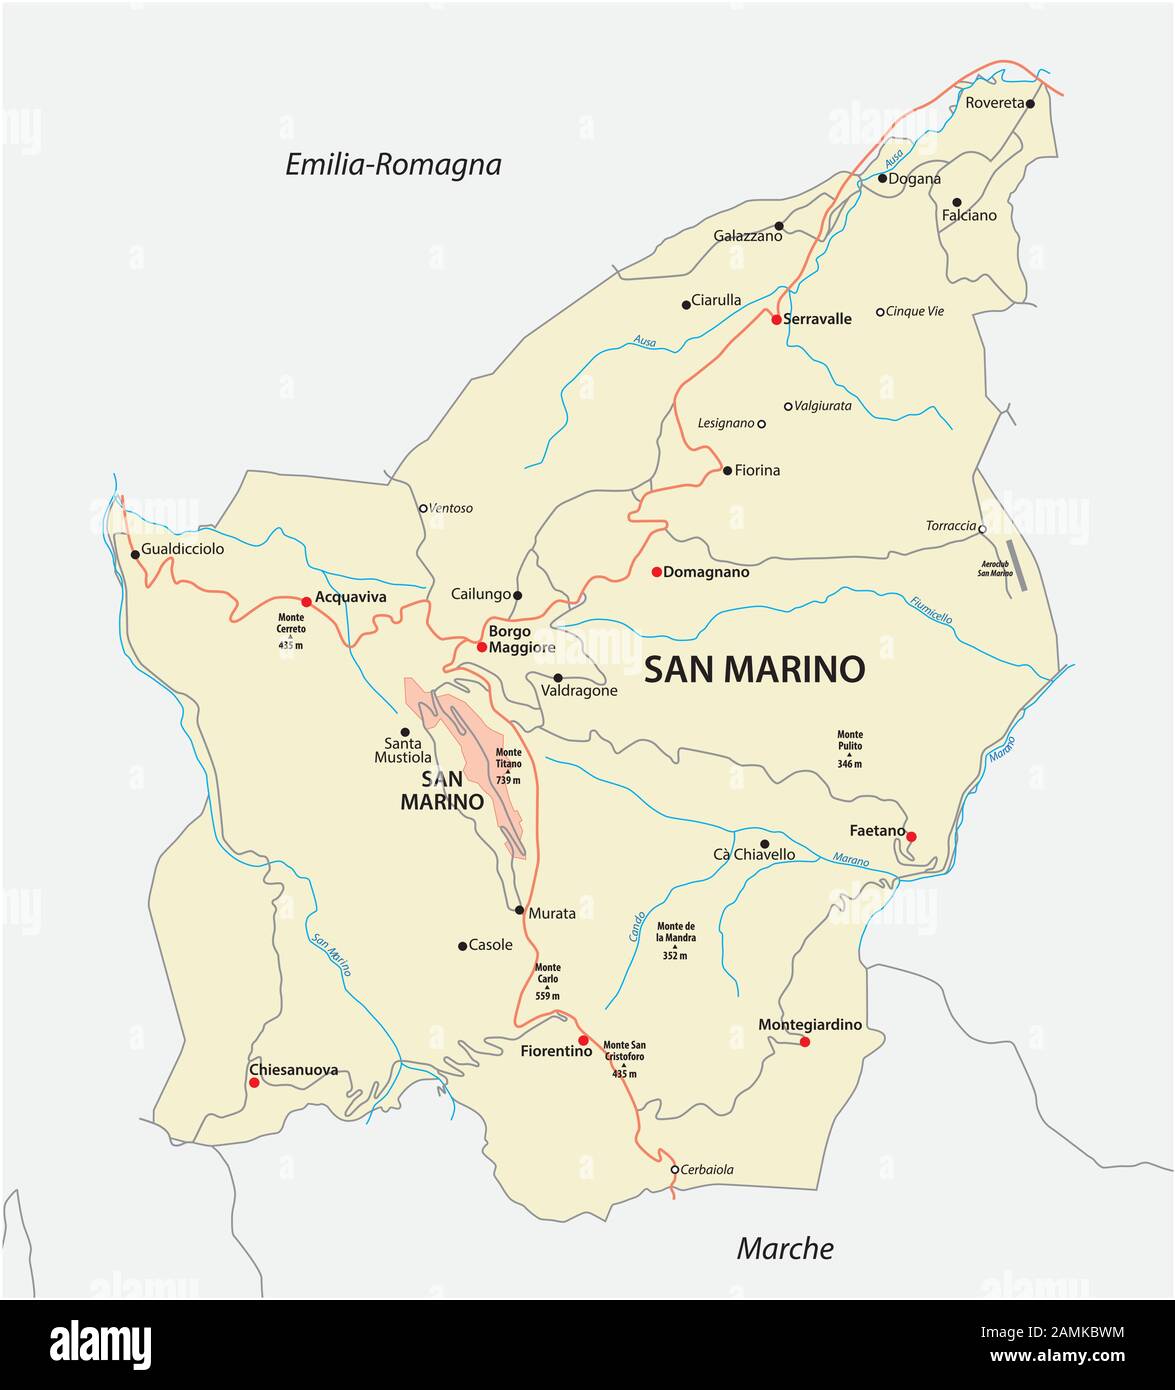 road map of the Republic of San Marino Stock Vector